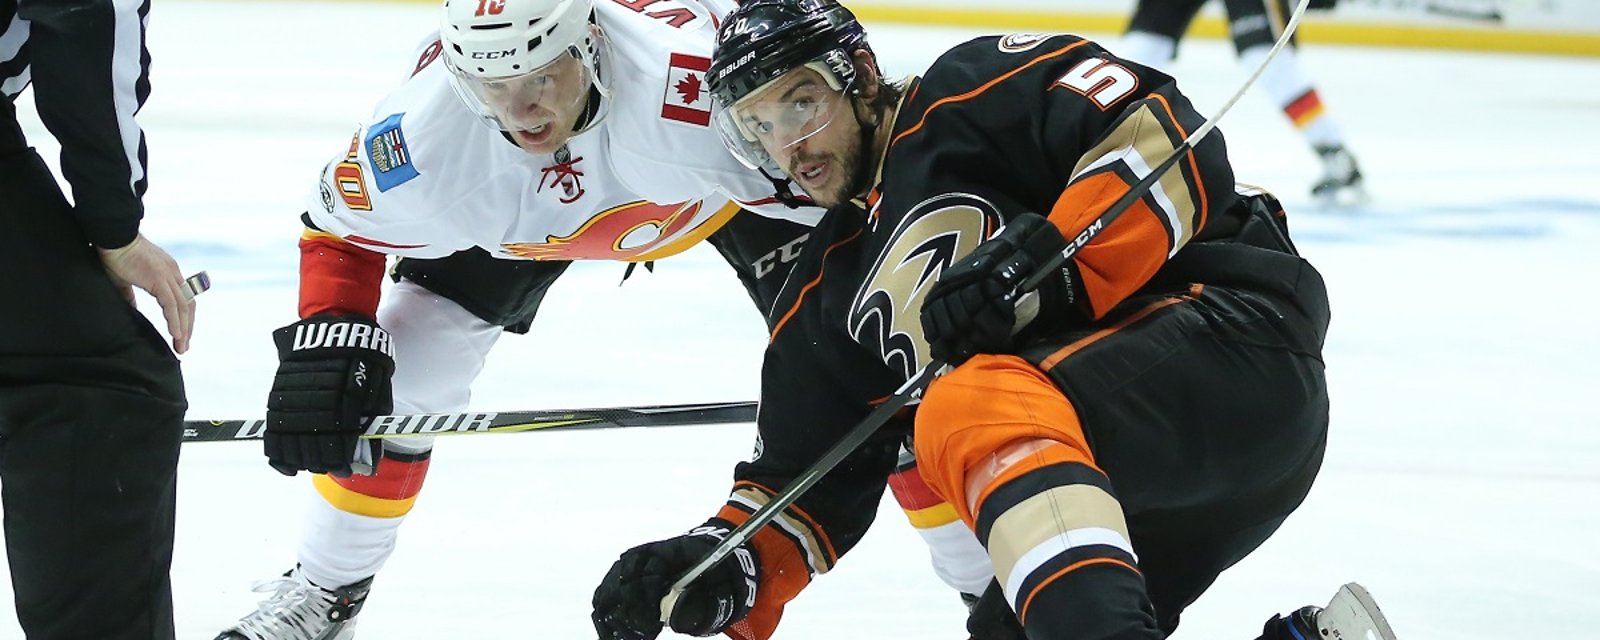 Report: Flames at risk of losing veteran player, 12 NHL teams interested.